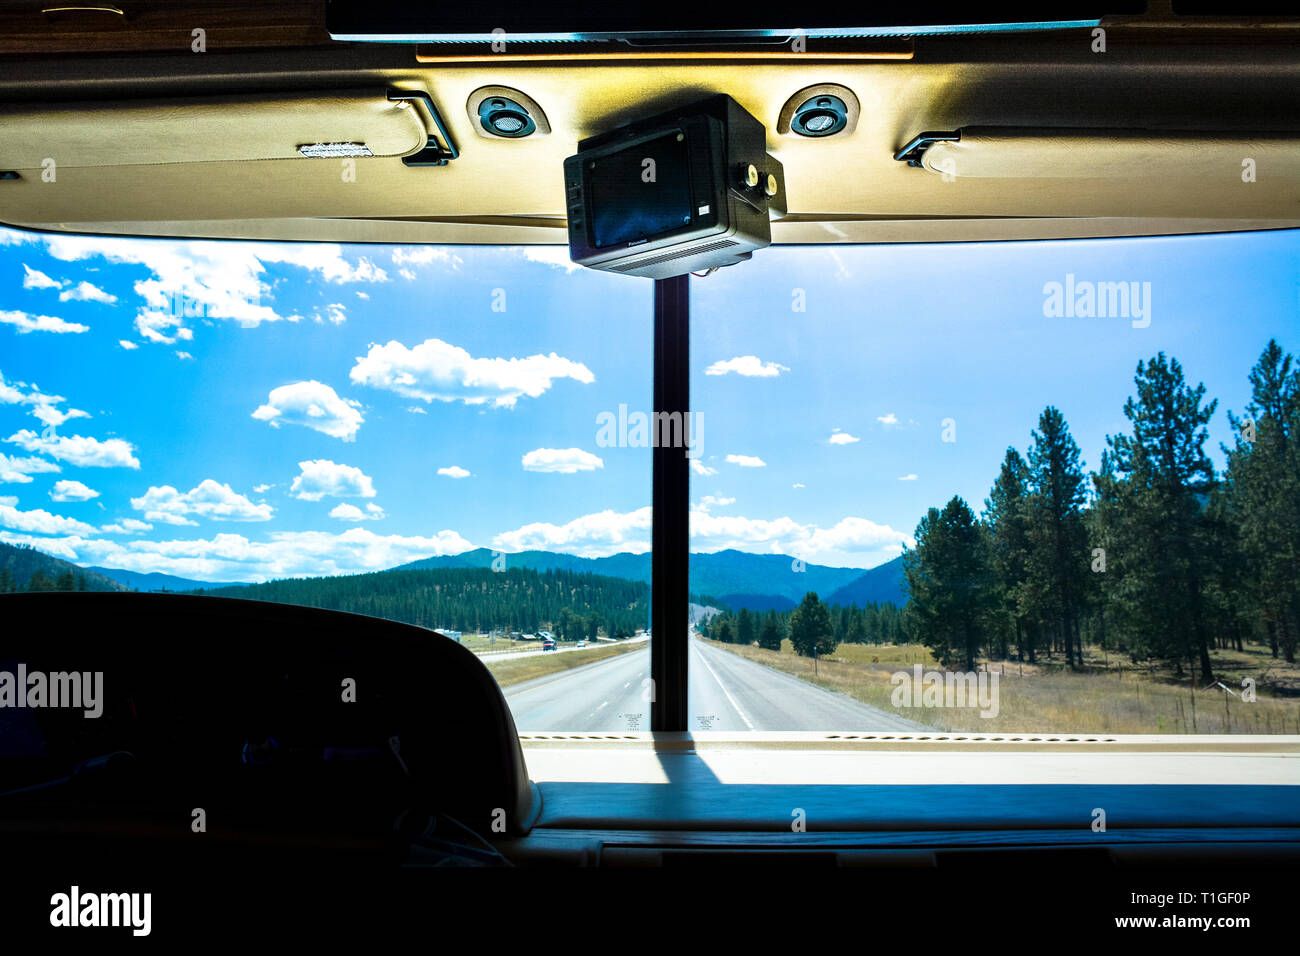 View from the inside of an RV looking out the front windshield to an endless road stretching out in western Montana on I-90 interstate highway, USA Stock Photo